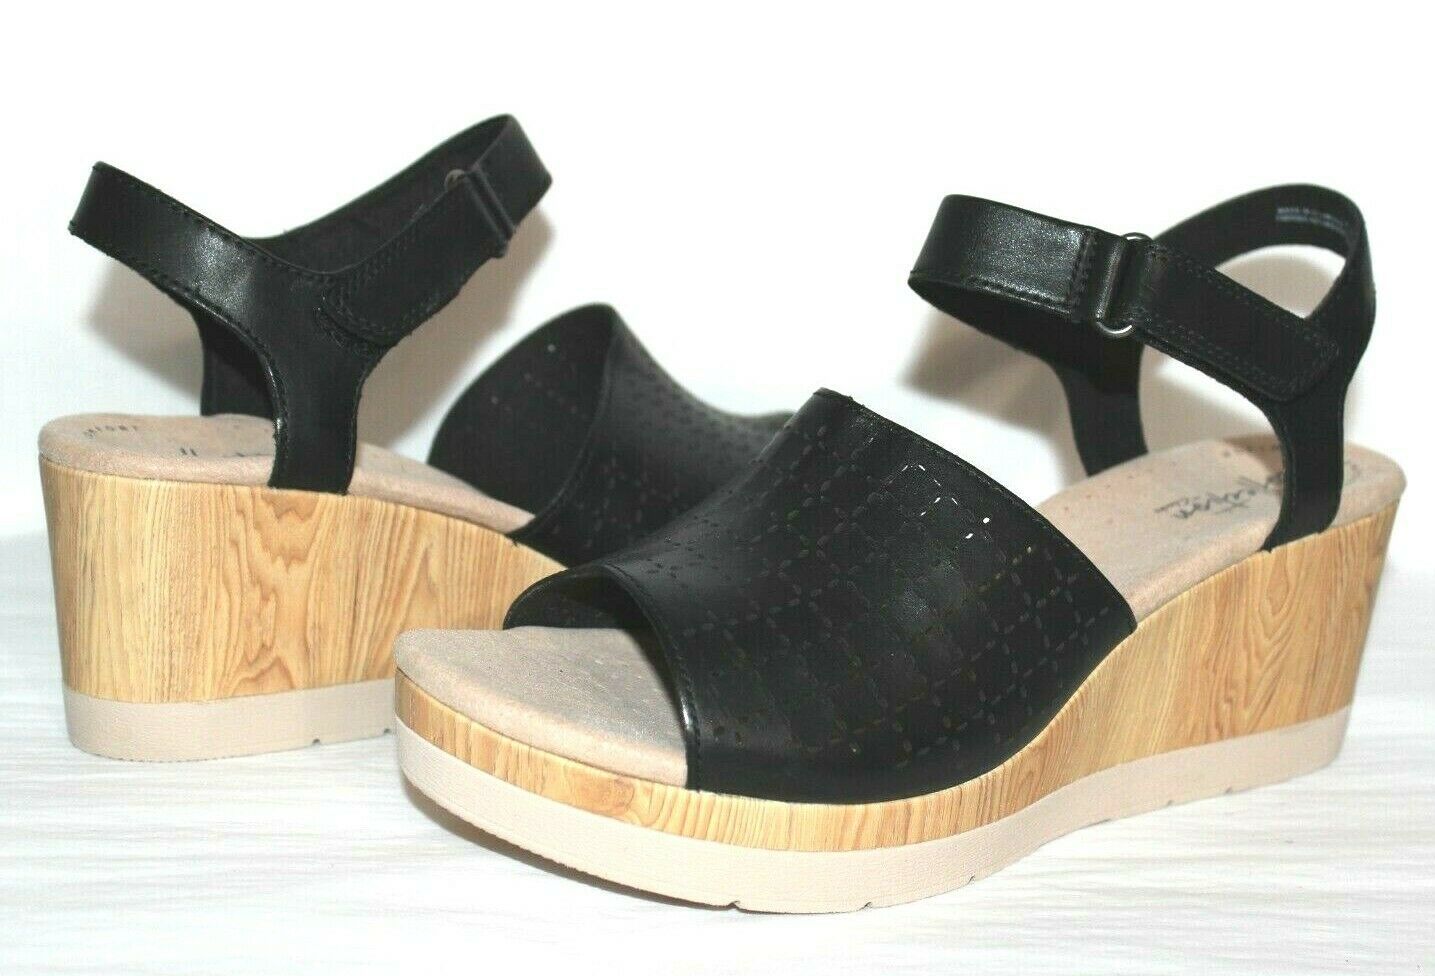 Primary image for ❤ Clarks Suede Glory Perforated Leather Platform Sandals 11 M NEW! L @ @ K